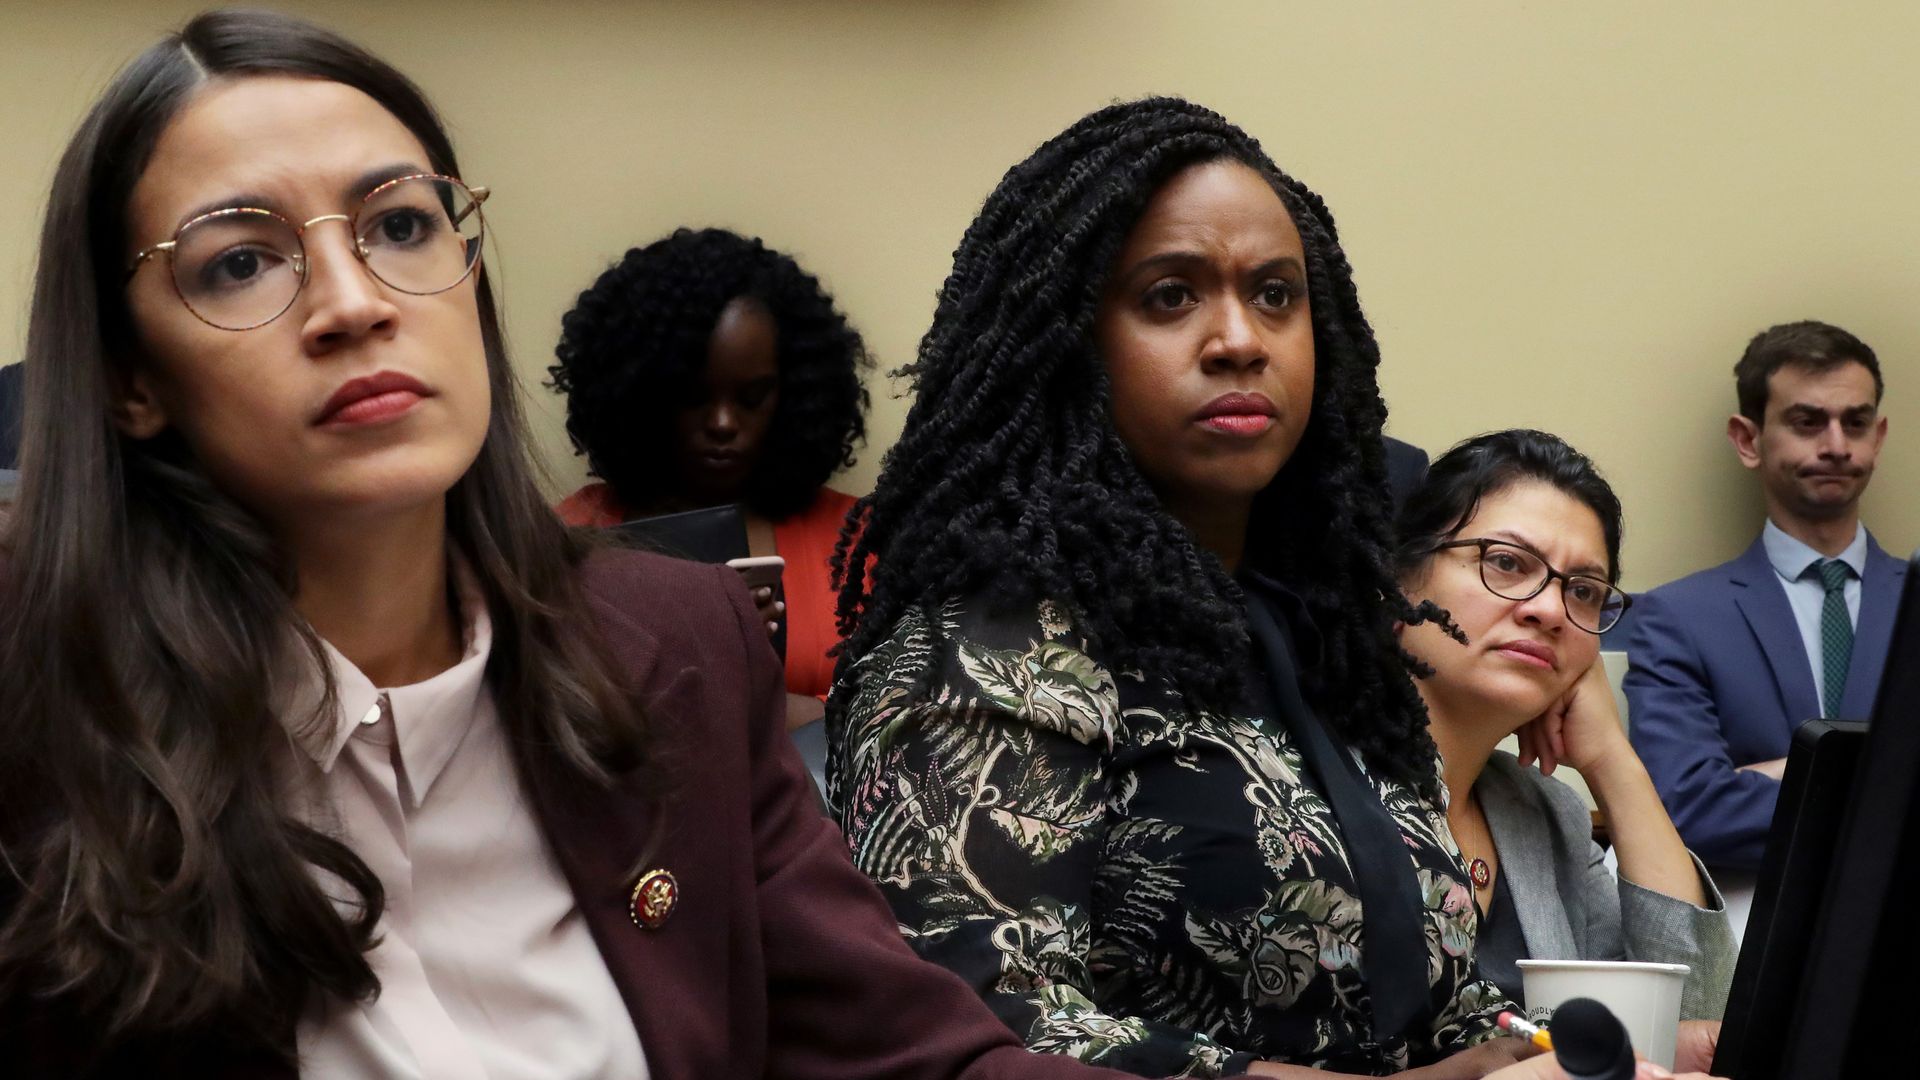 Three-fourths of The Squad are seen listening during a congressional hearing.